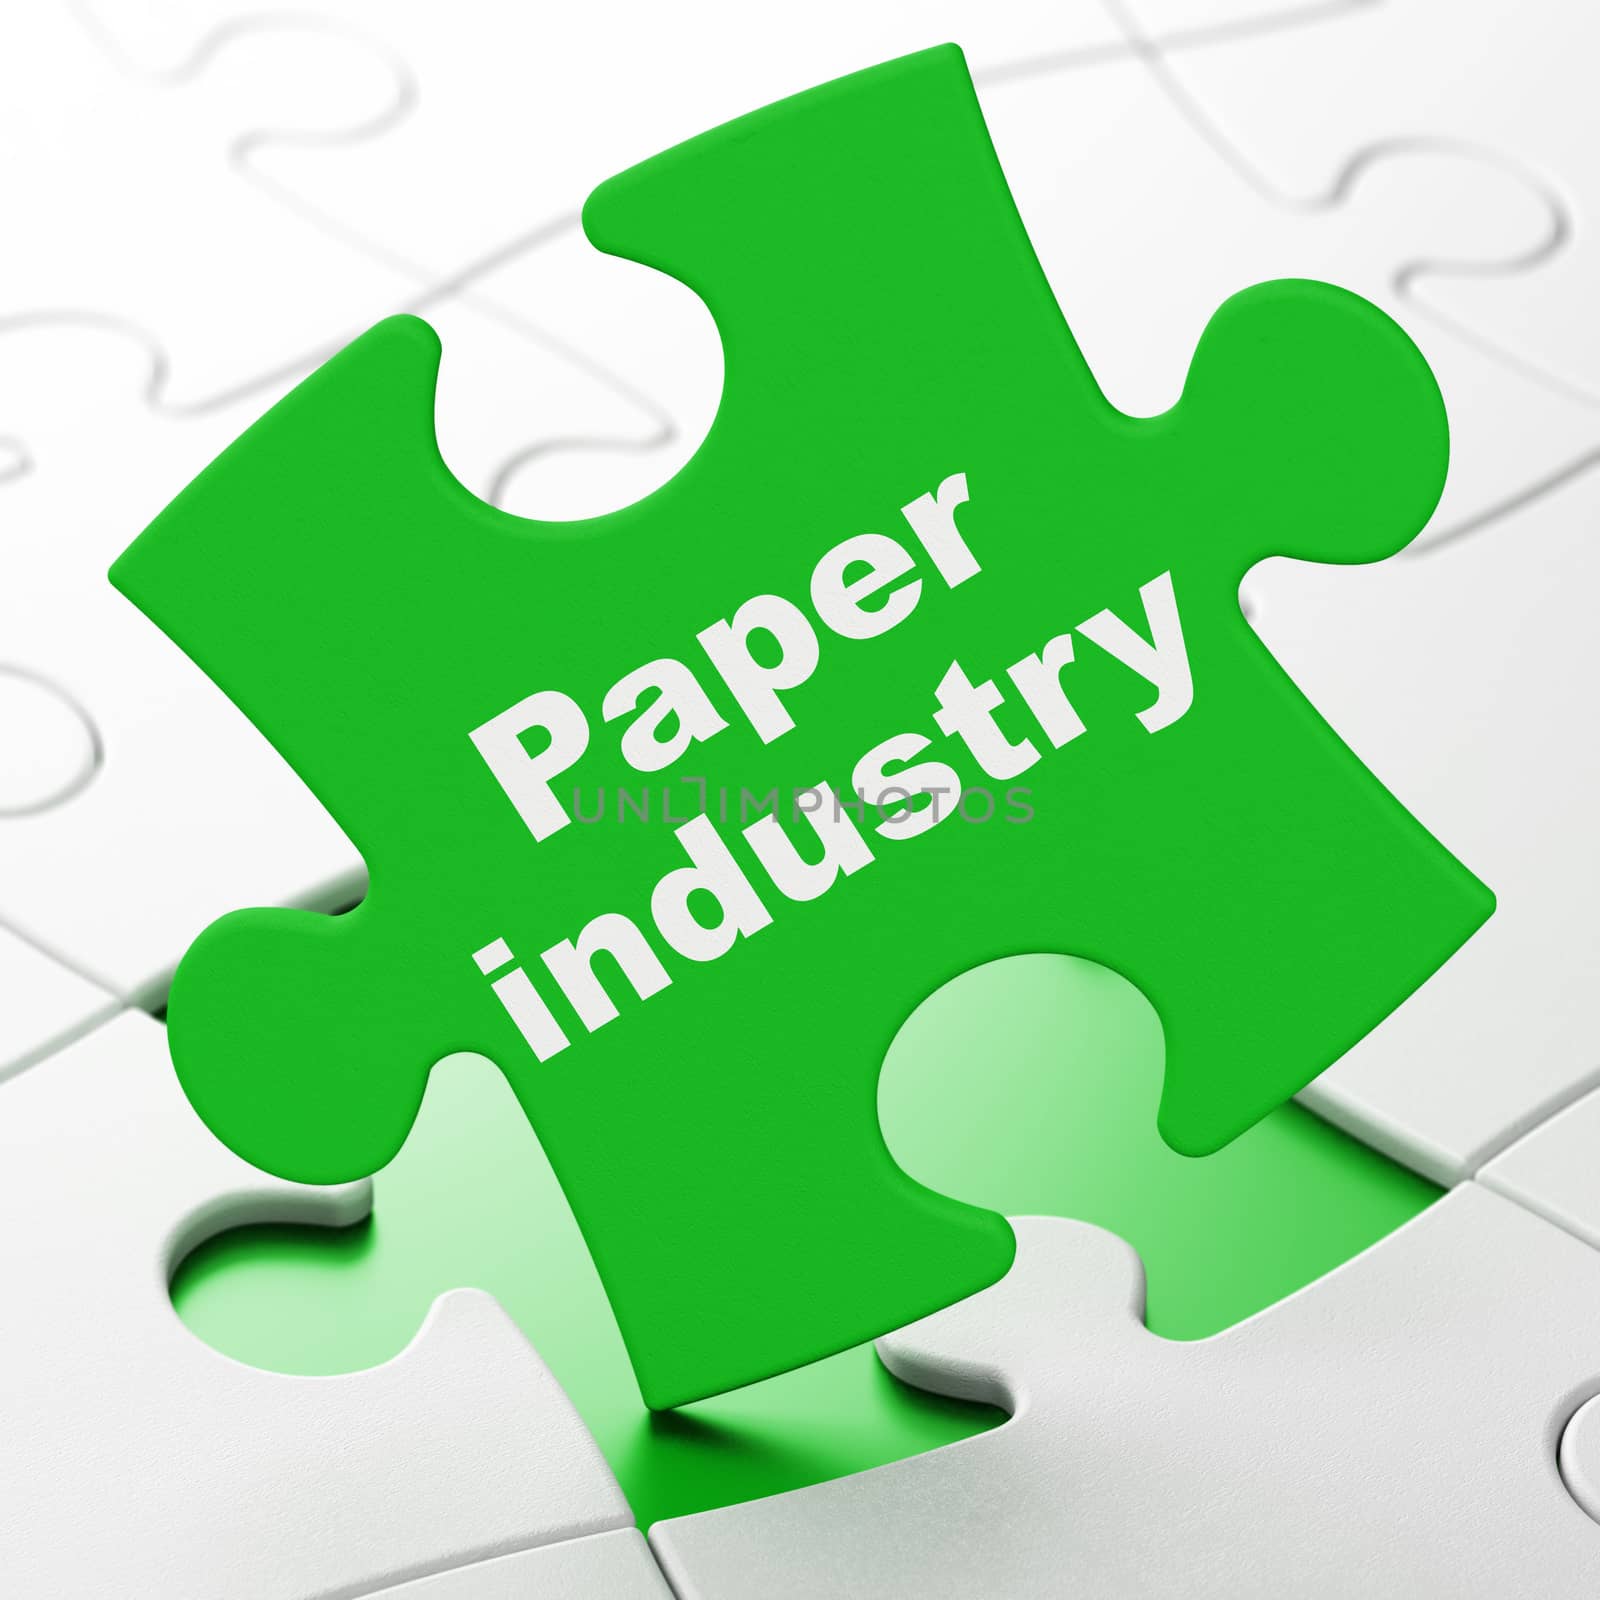 Industry concept: Paper Industry on Green puzzle pieces background, 3D rendering